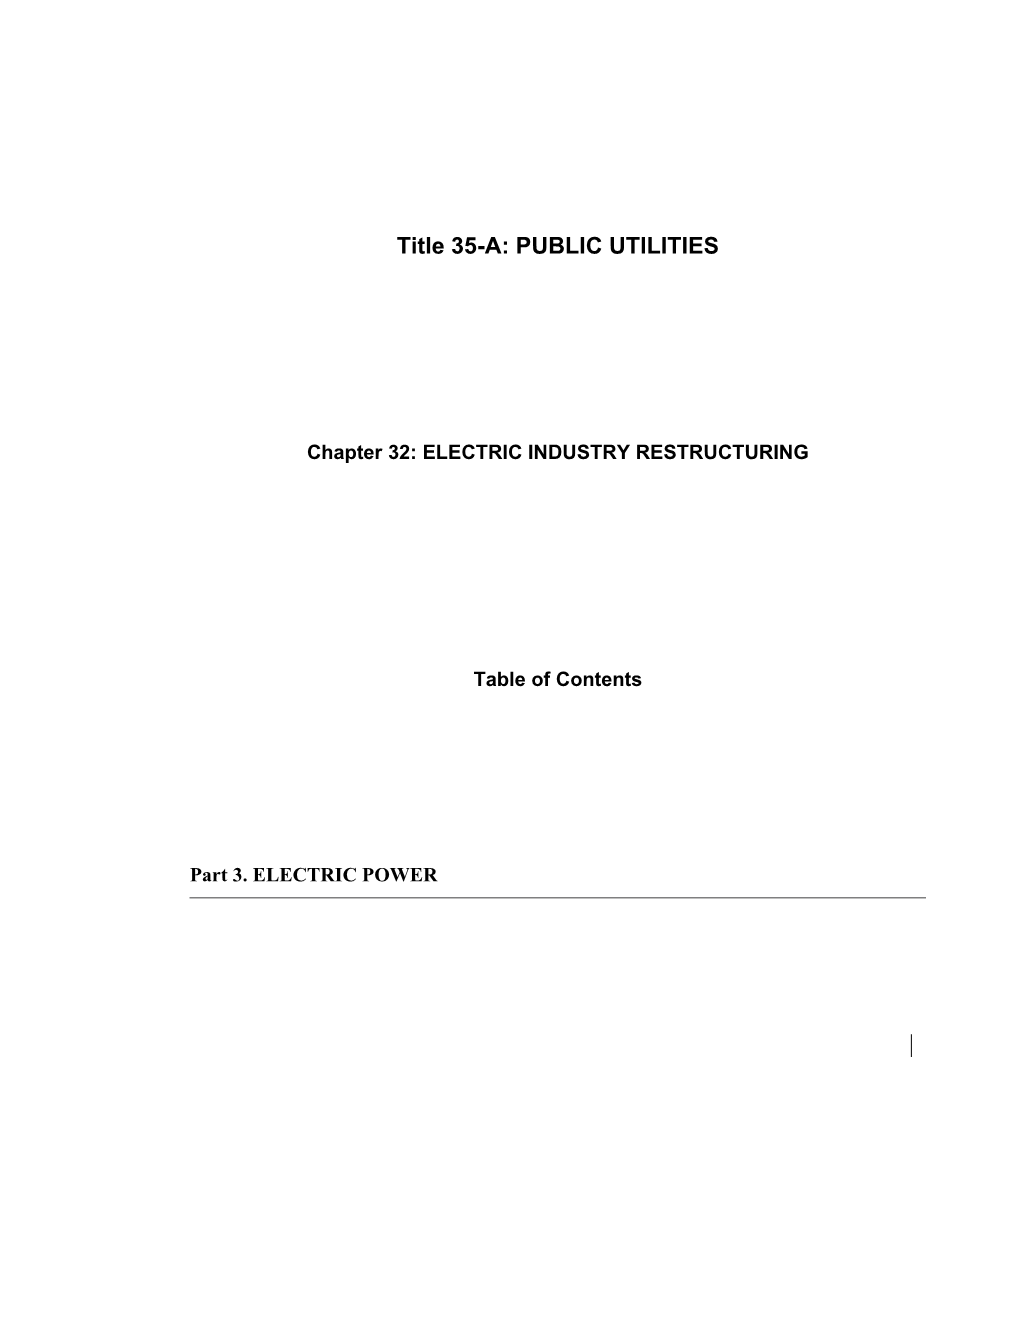 MRS Title 35-A, Chapter32: ELECTRIC INDUSTRY RESTRUCTURING